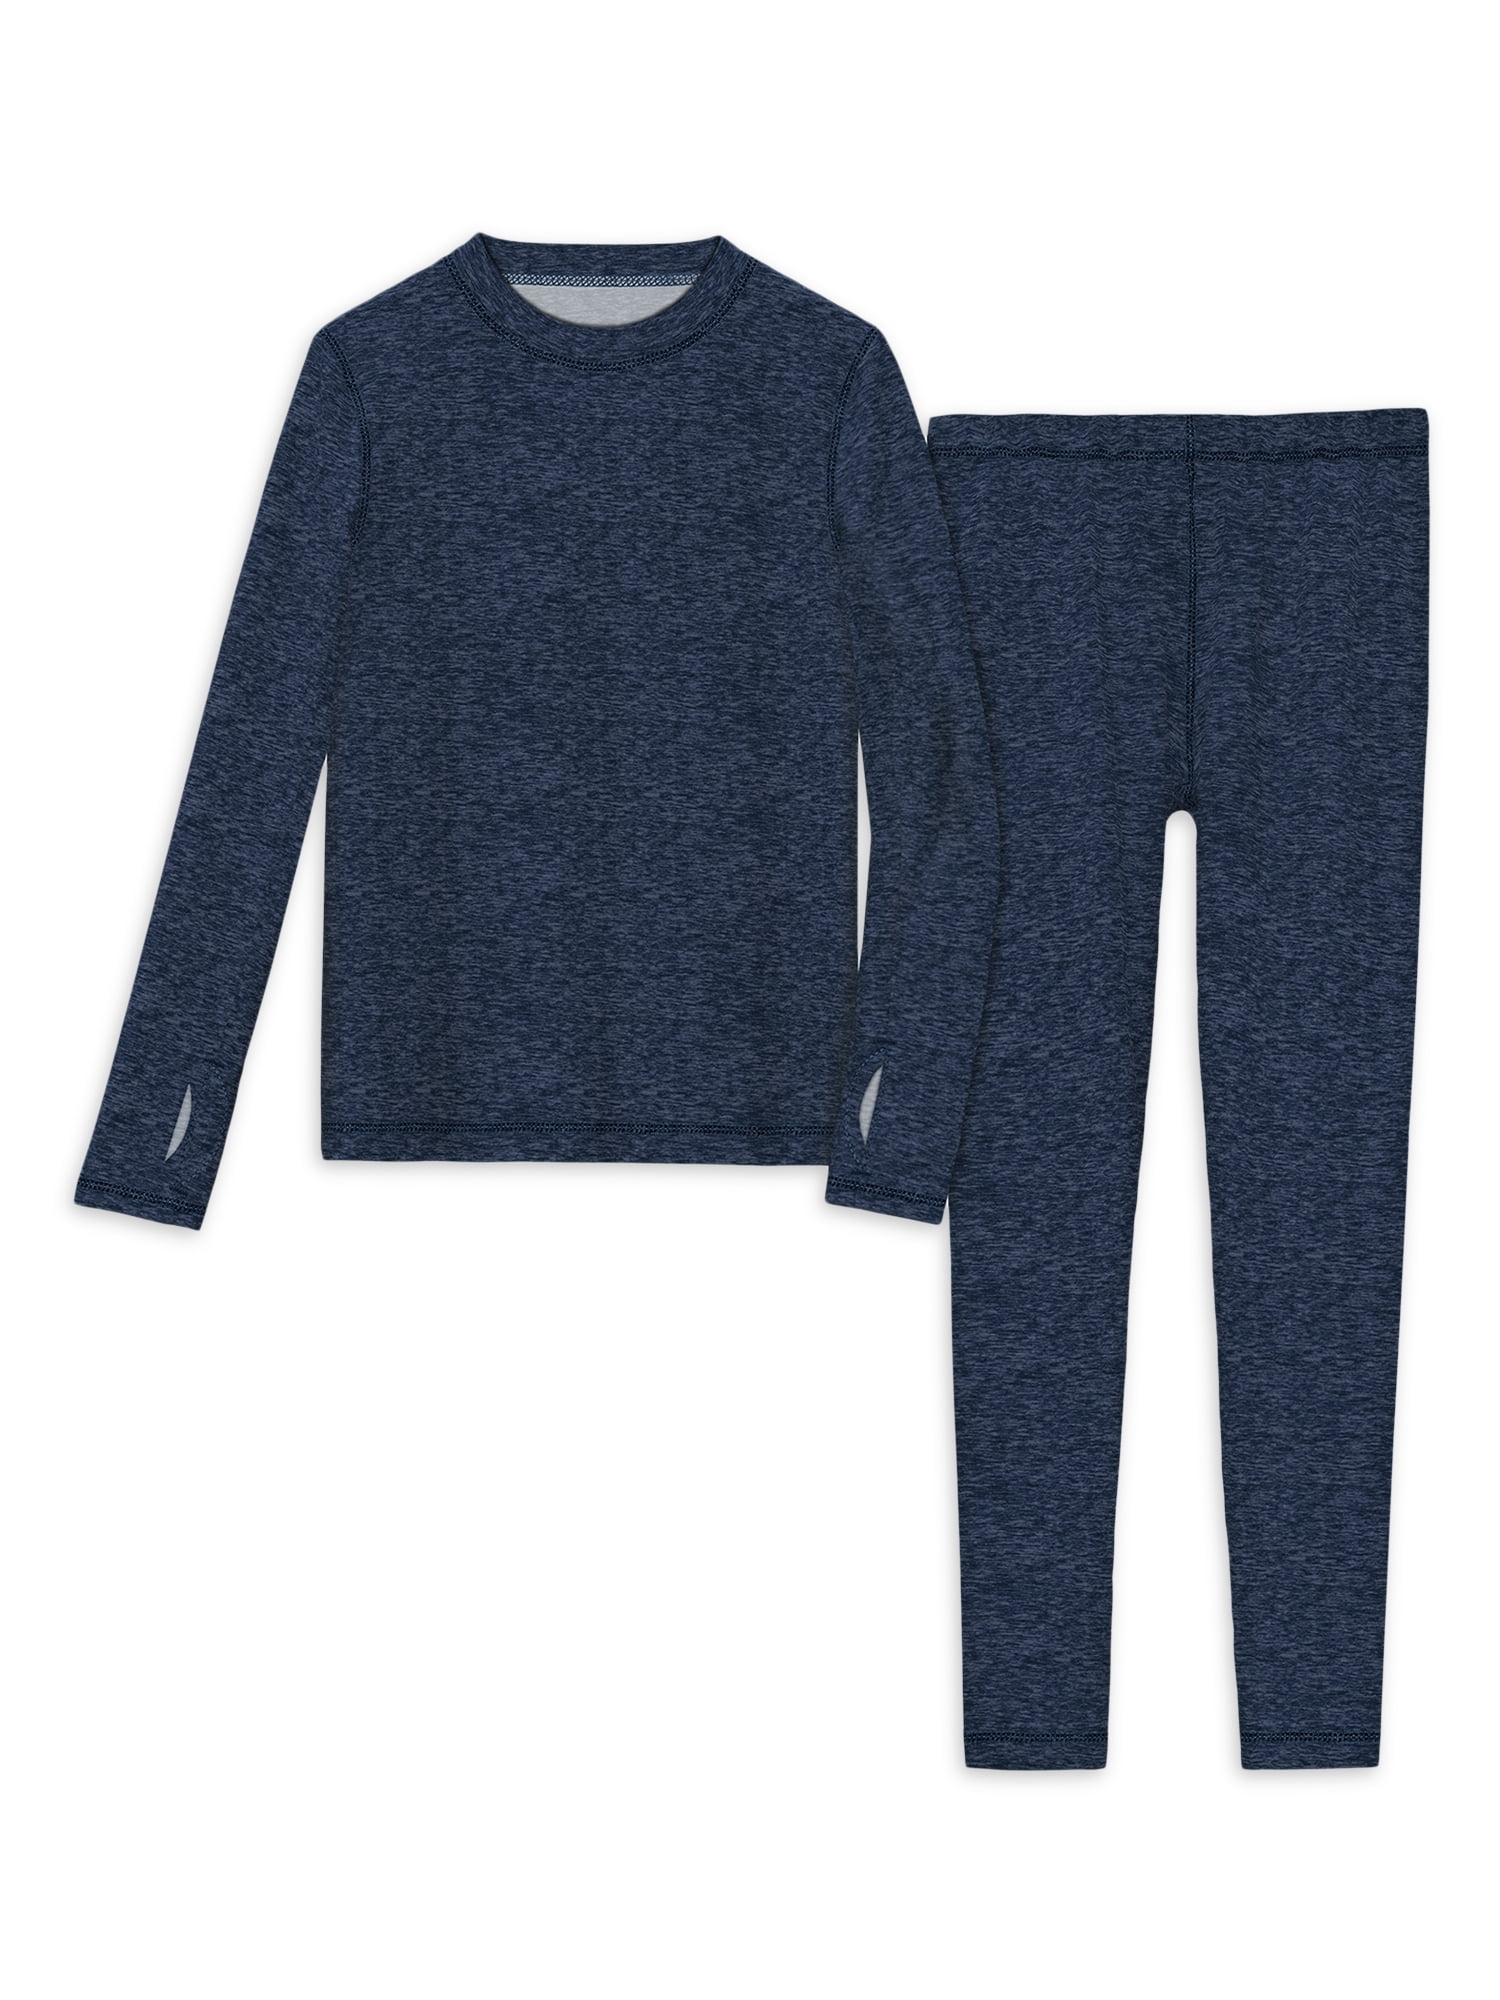 Athletic Works Boys Thermal Set, Sizes XS-2XL